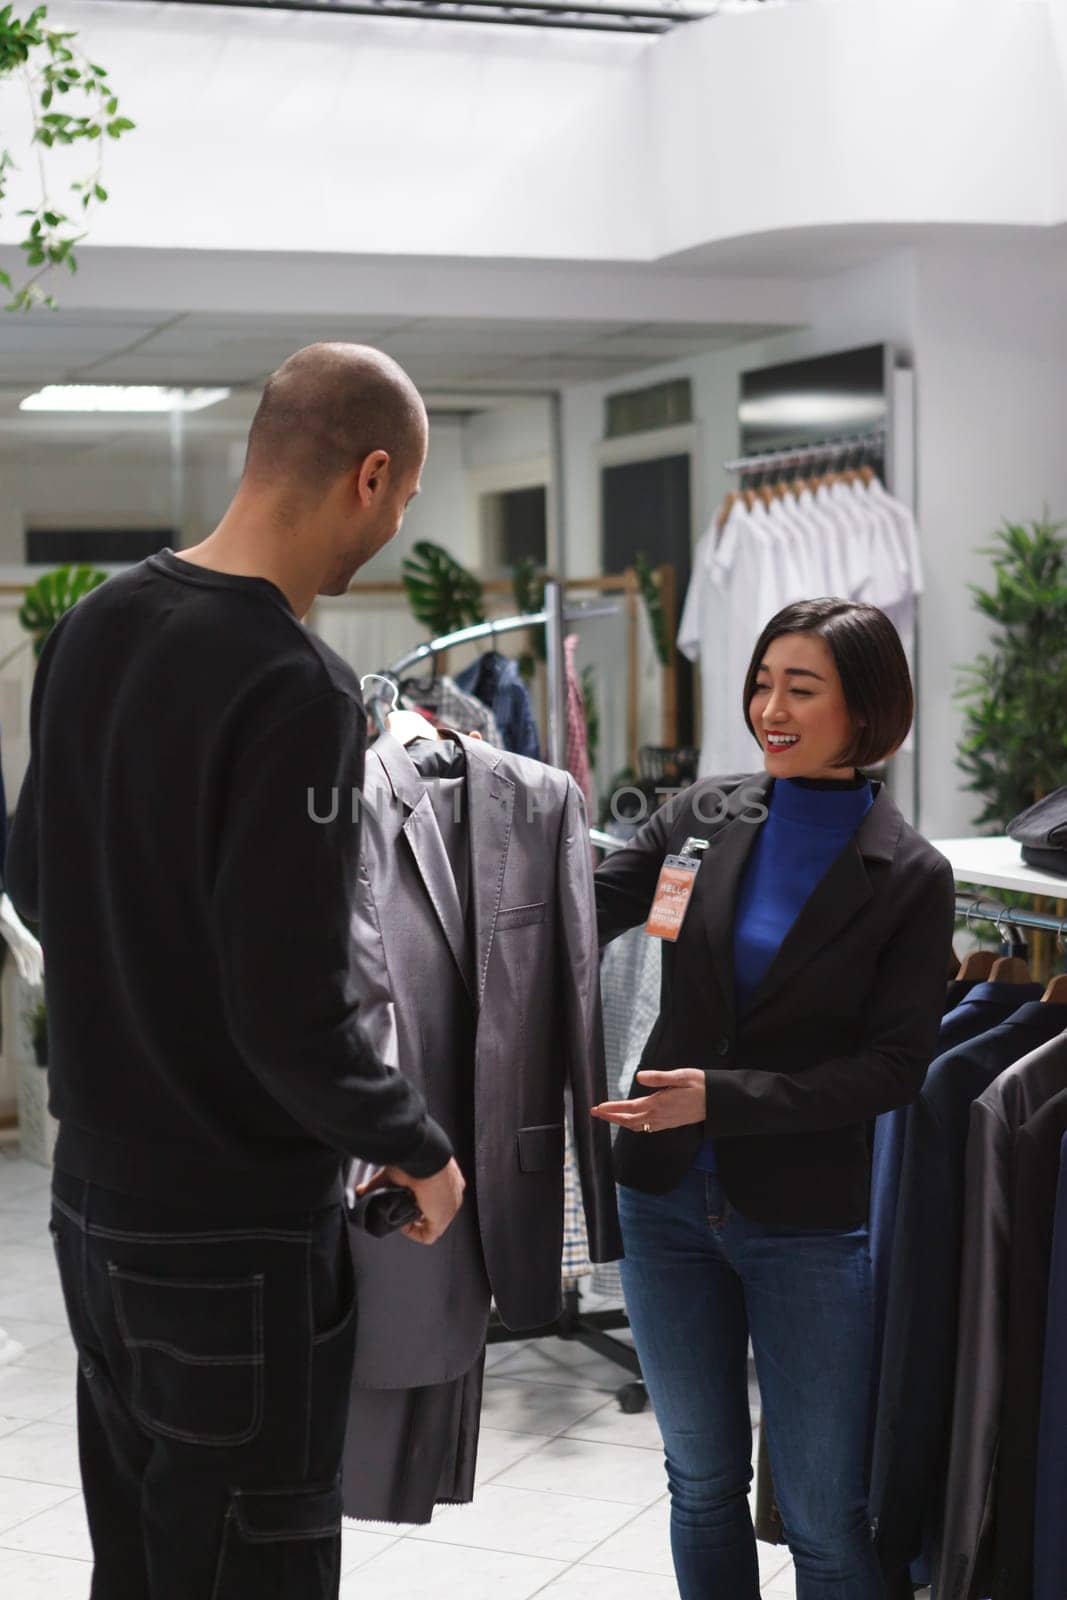 Clothing store assistant offering guidance to arab man client in choosing apparel style and fit. Shopping center fashion department worker consulting customer in selecting jacket